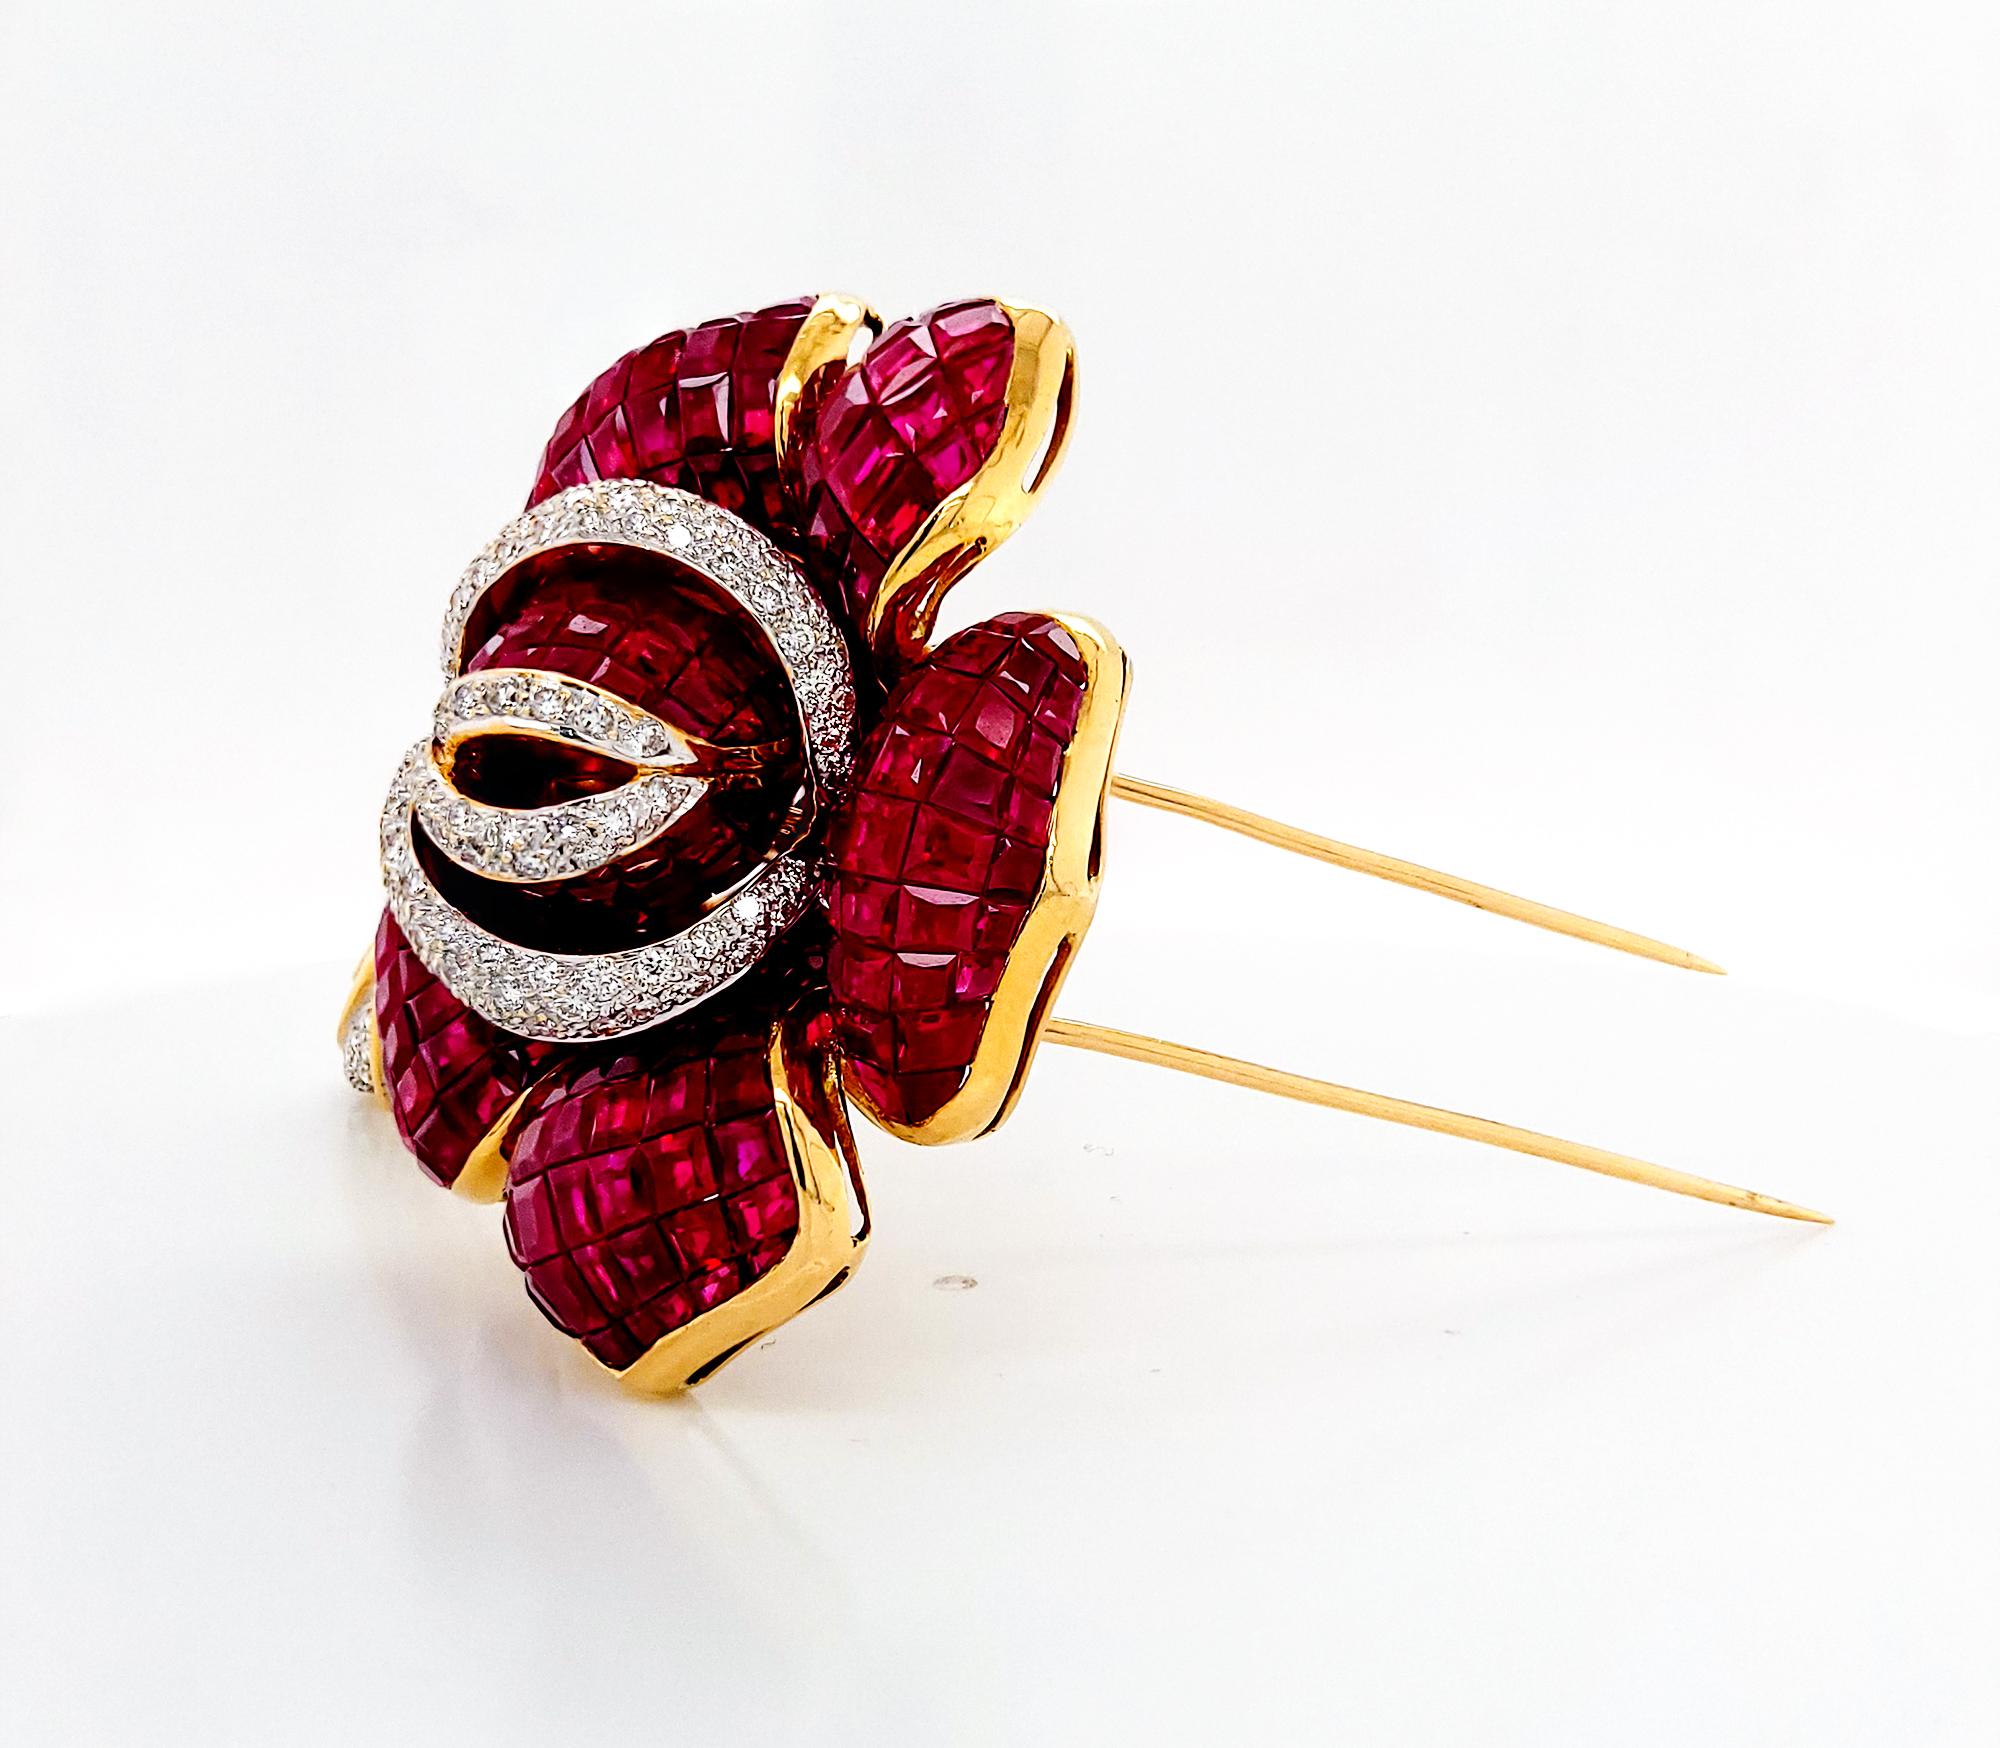 An incredible vintage brooch embellished with the invisibly-set rubies and pave diamonds. Circa 1970.
The brooch is certified by C.Dunaigre (Switzerland) stating that the rubies are Burmese with no indication of heating. 
The metal is 18K yellow